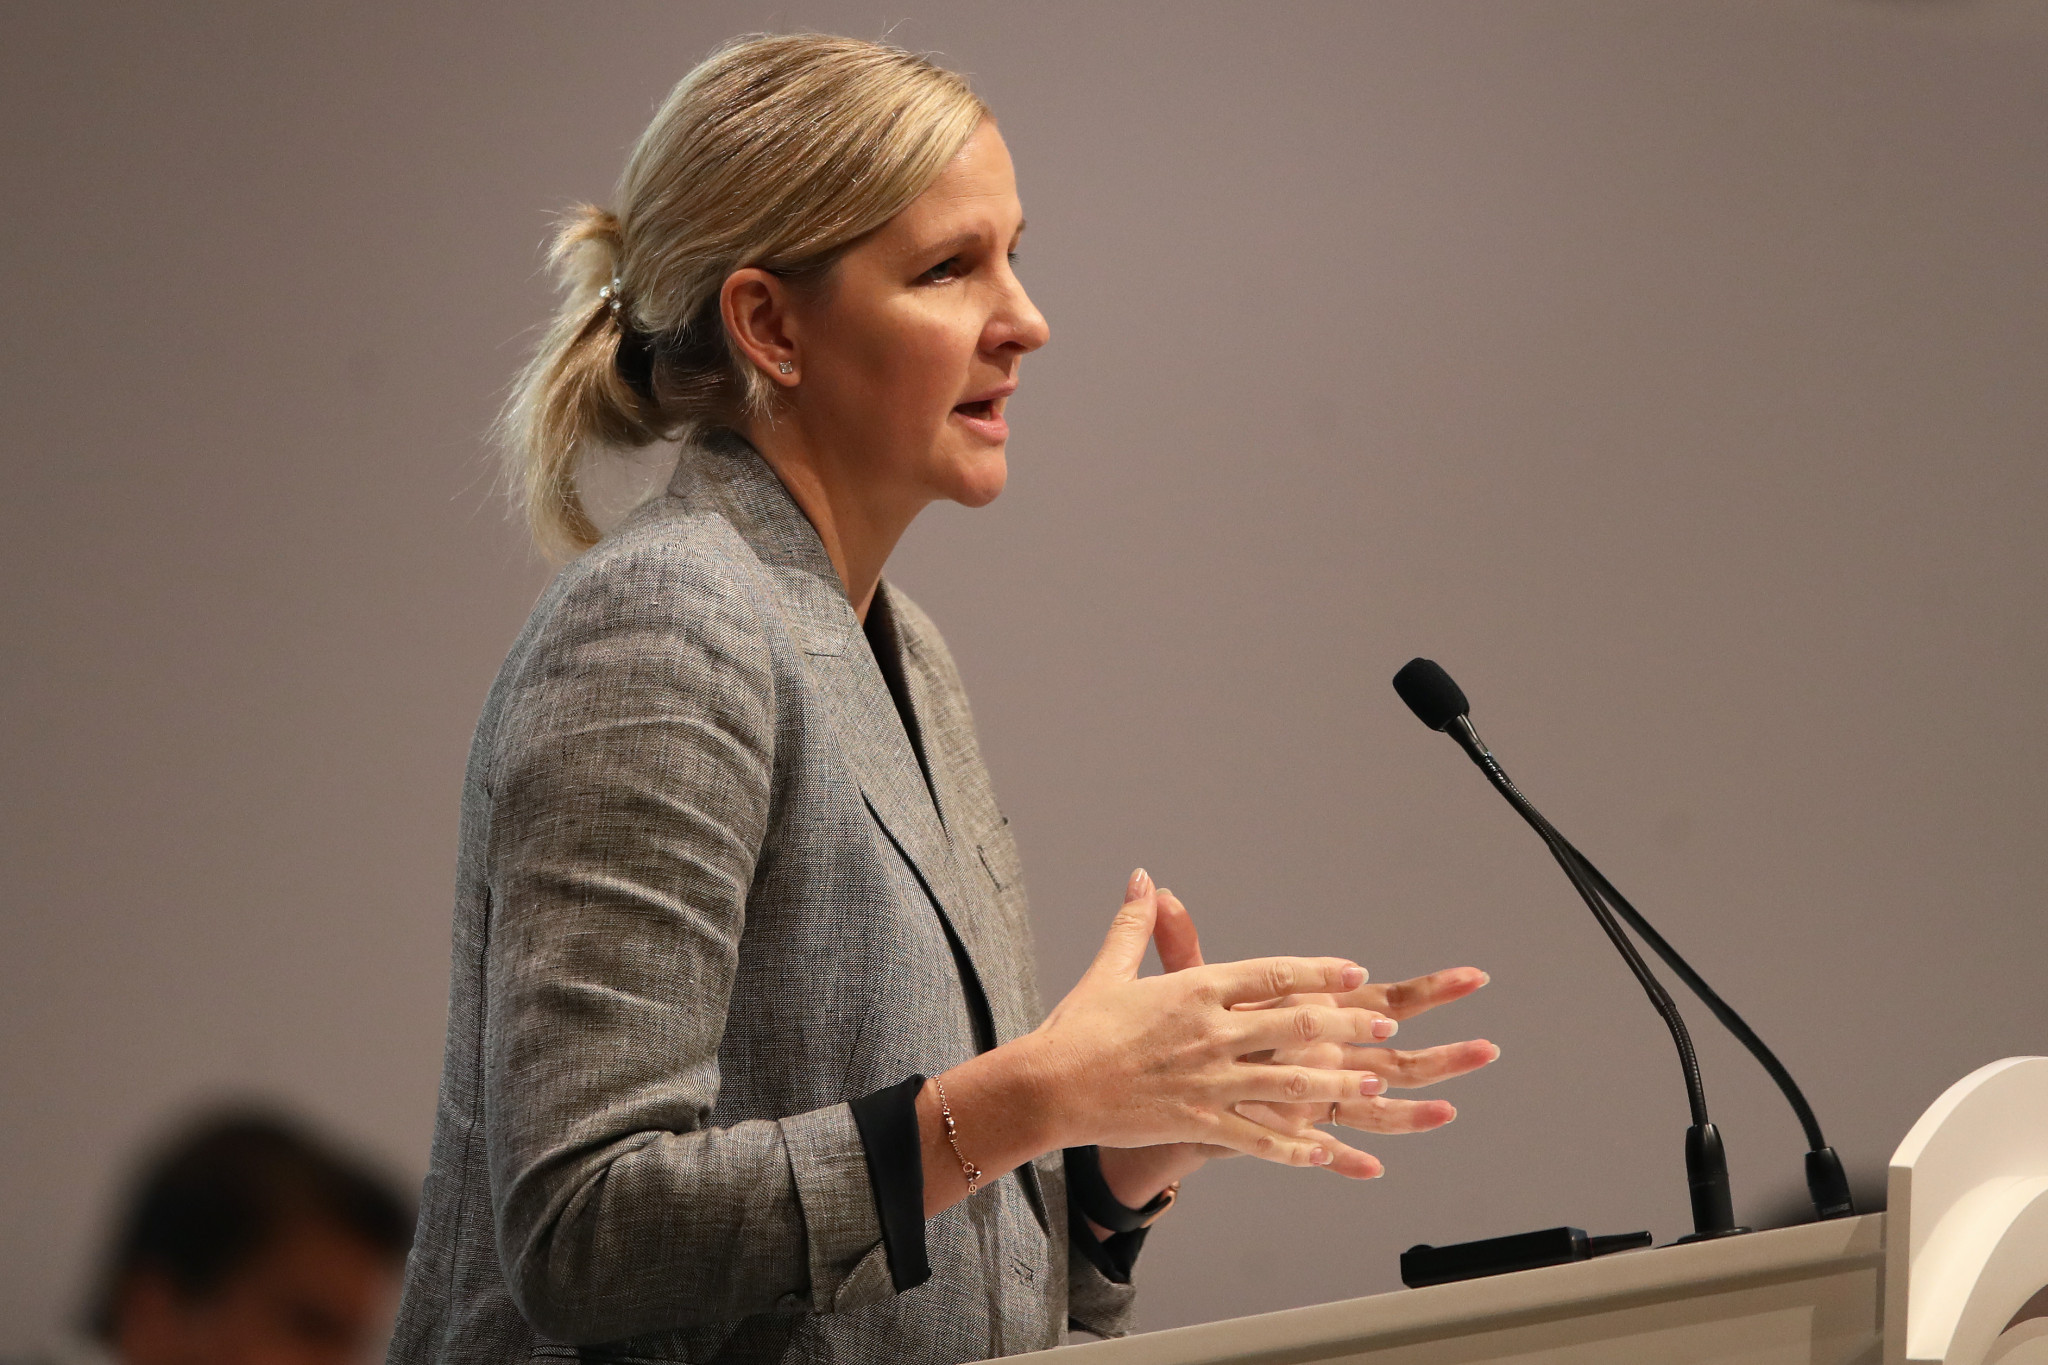 IOC Athletes' Commission chair Kirsty Coventry has claimed that most competitors are against podium protests at events like the Olympic Games ©Getty Images